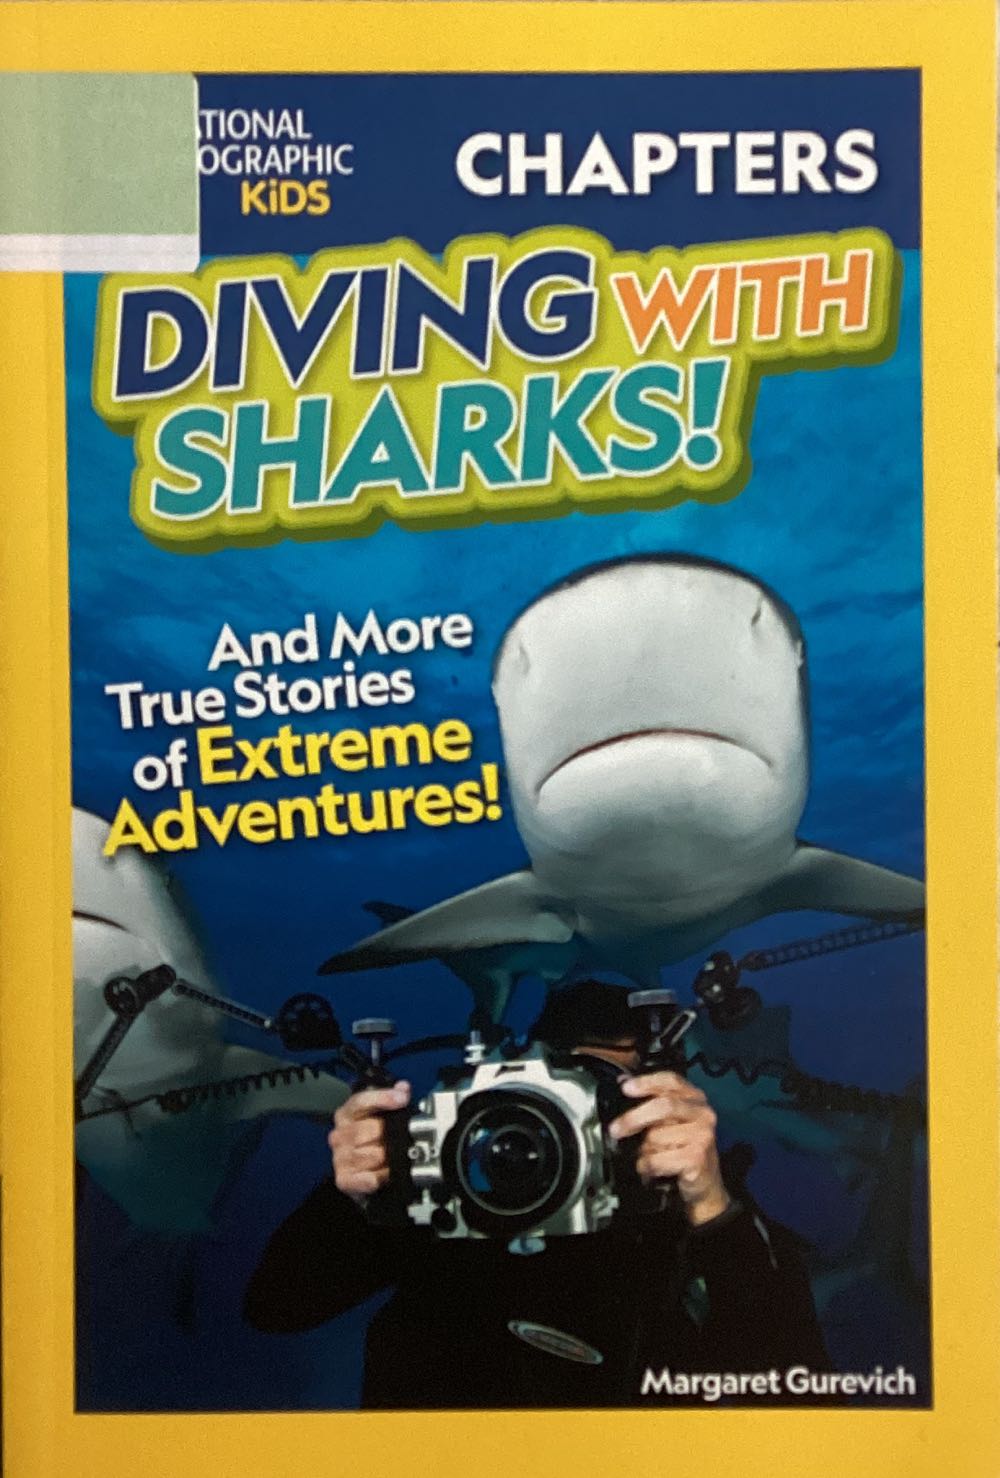 Diving With Sharks! And More True Stories Of Extreme Adventures - Margaret Gurevich book collectible [Barcode 9781426375019] - Main Image 1